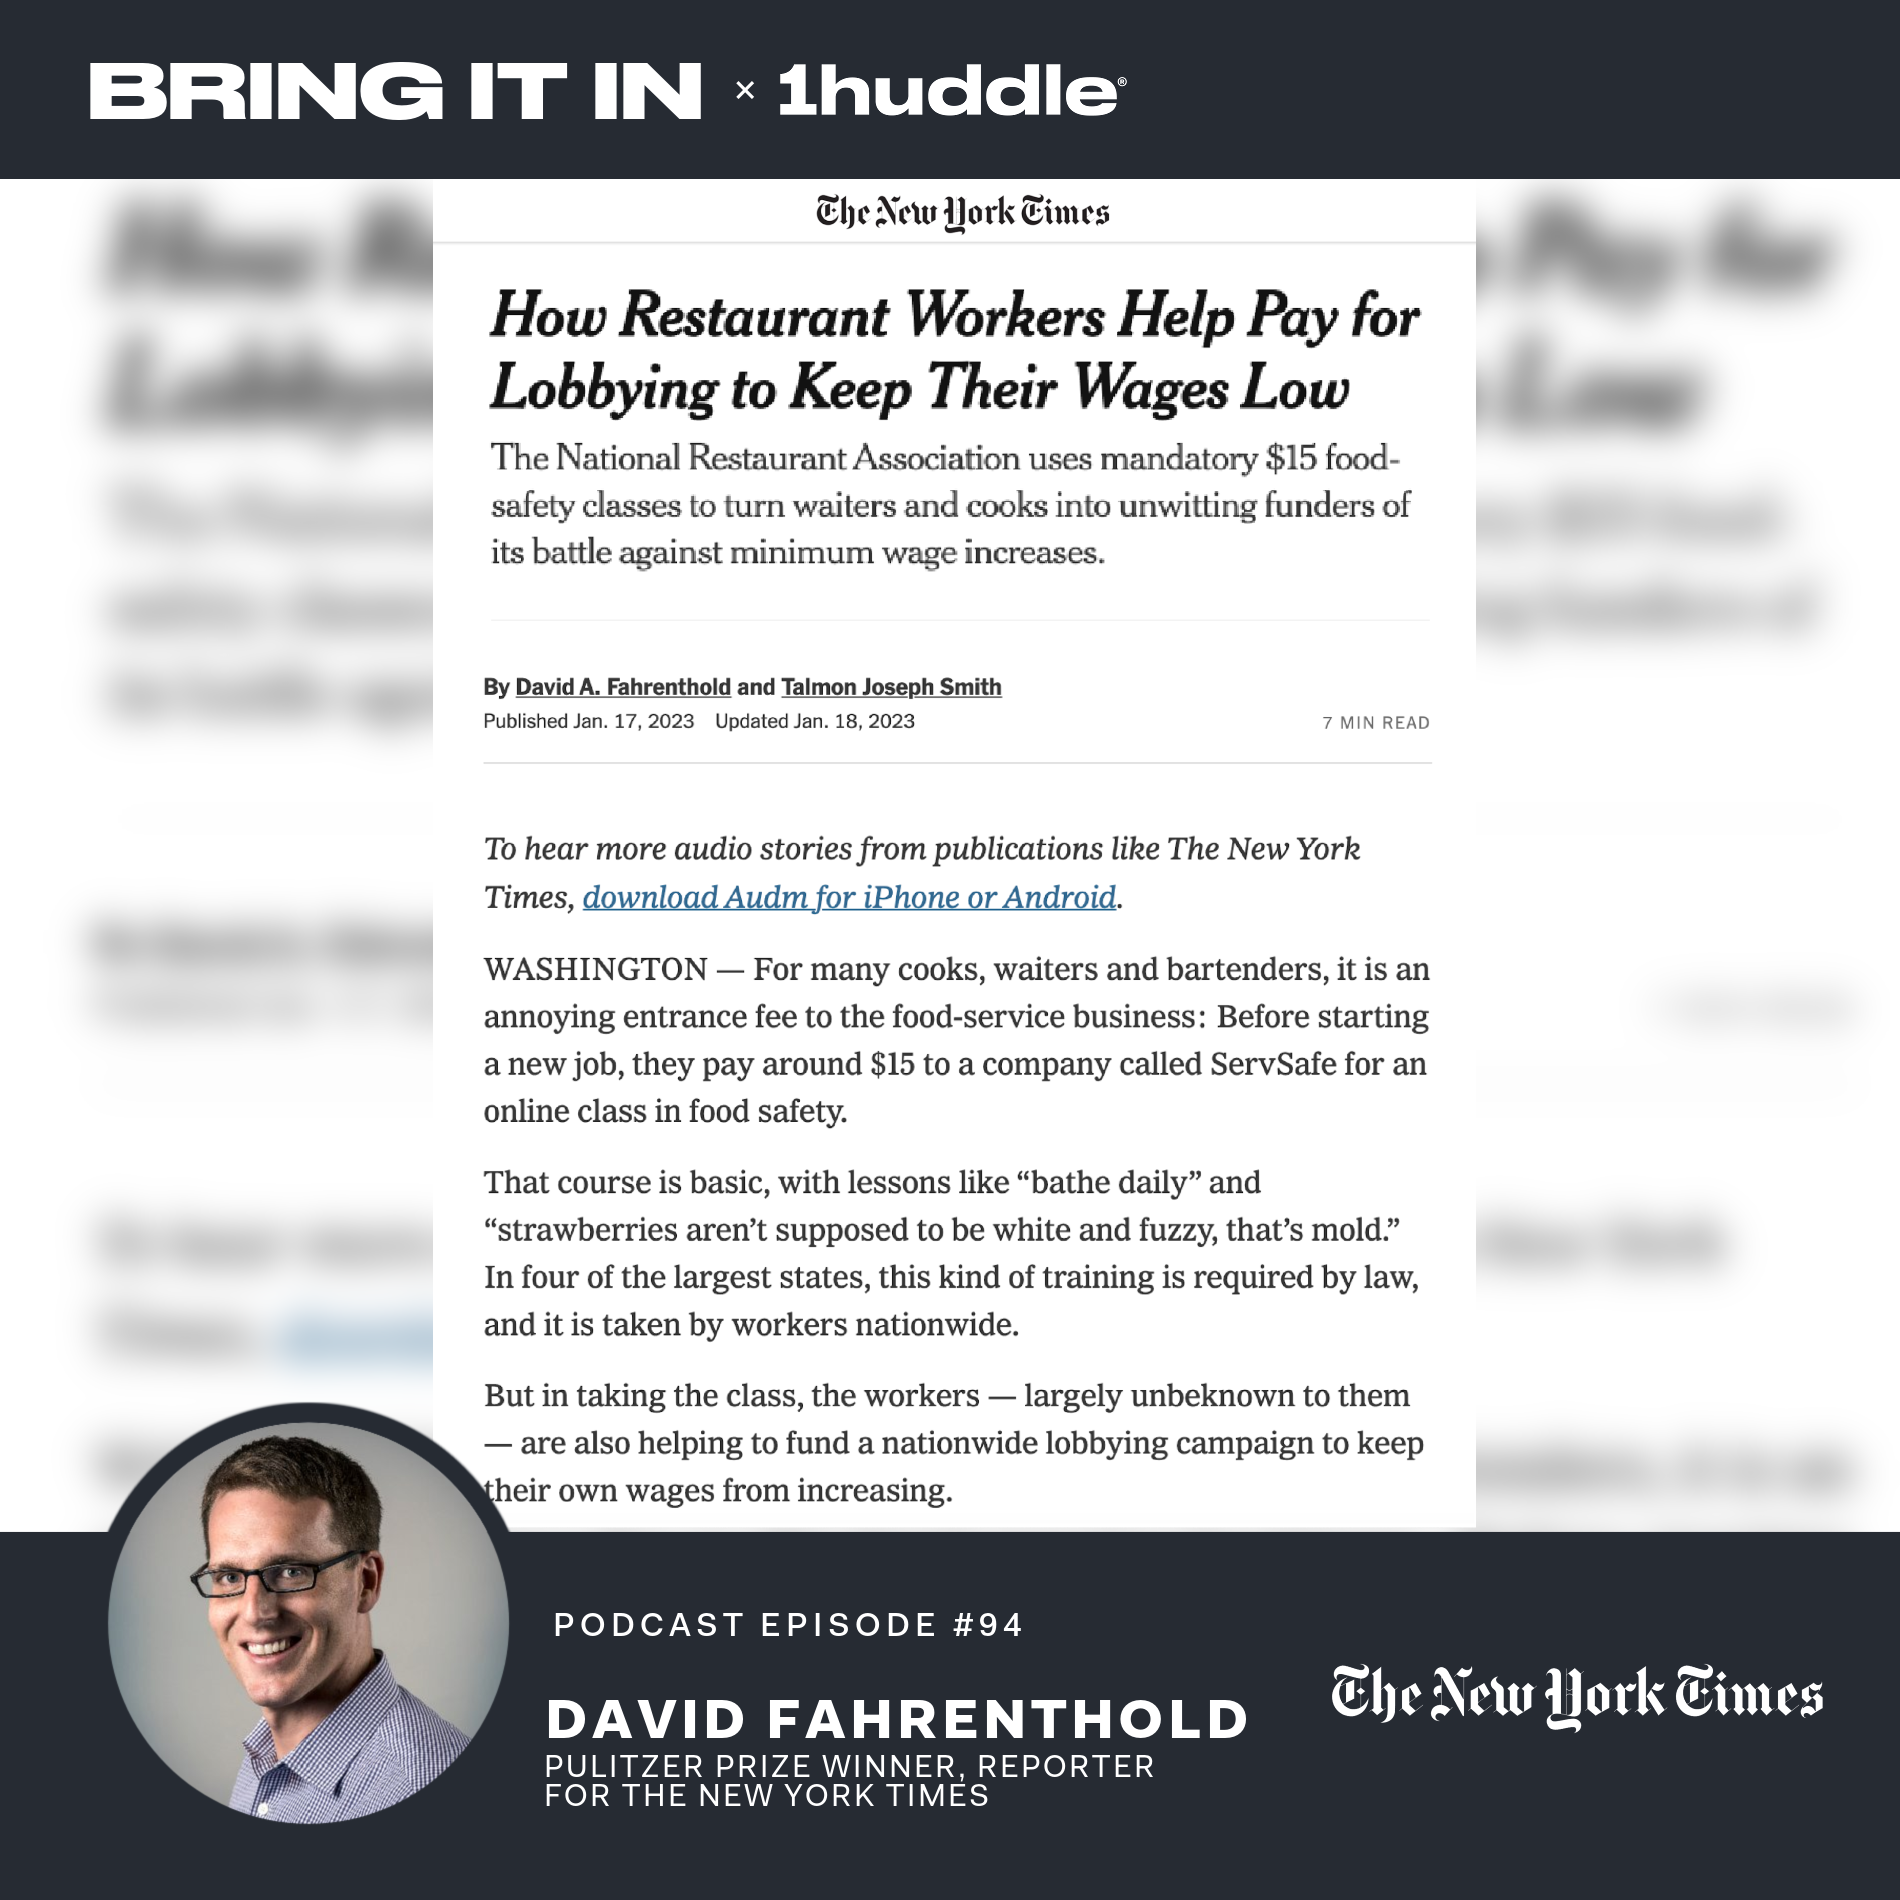 David Fahrenthold Pulitzer Prize-Winning Reporter for The New York Times on “How Restaurant Workers Pay for Lobbying to Keep Their Wages Low”